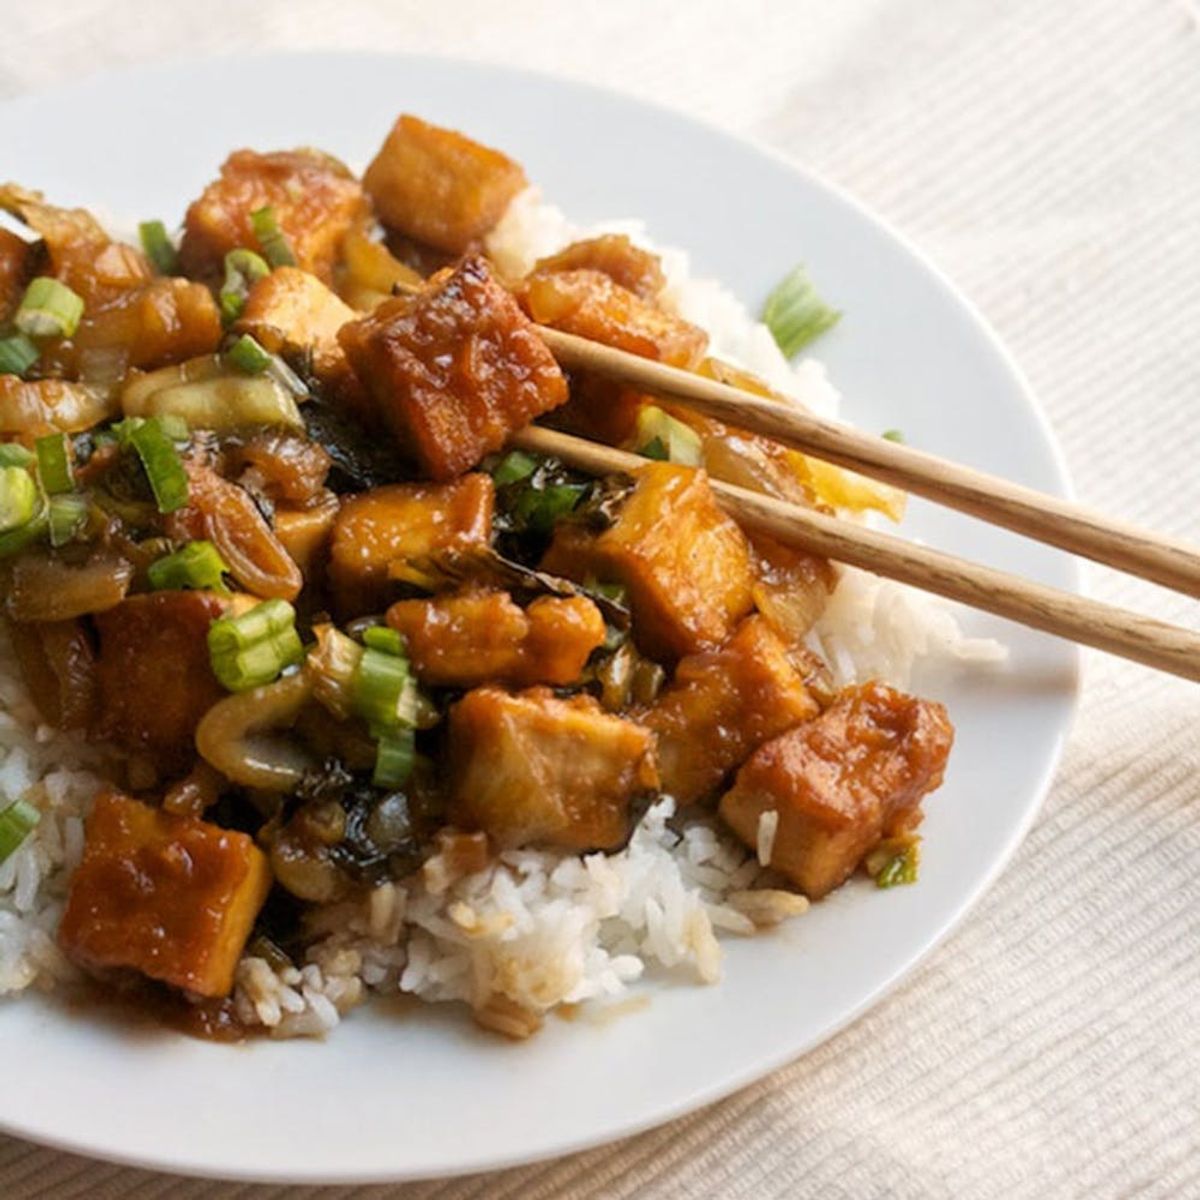 Ditch the Delivery! 12 Takeout Dishes You Can Make Yourself